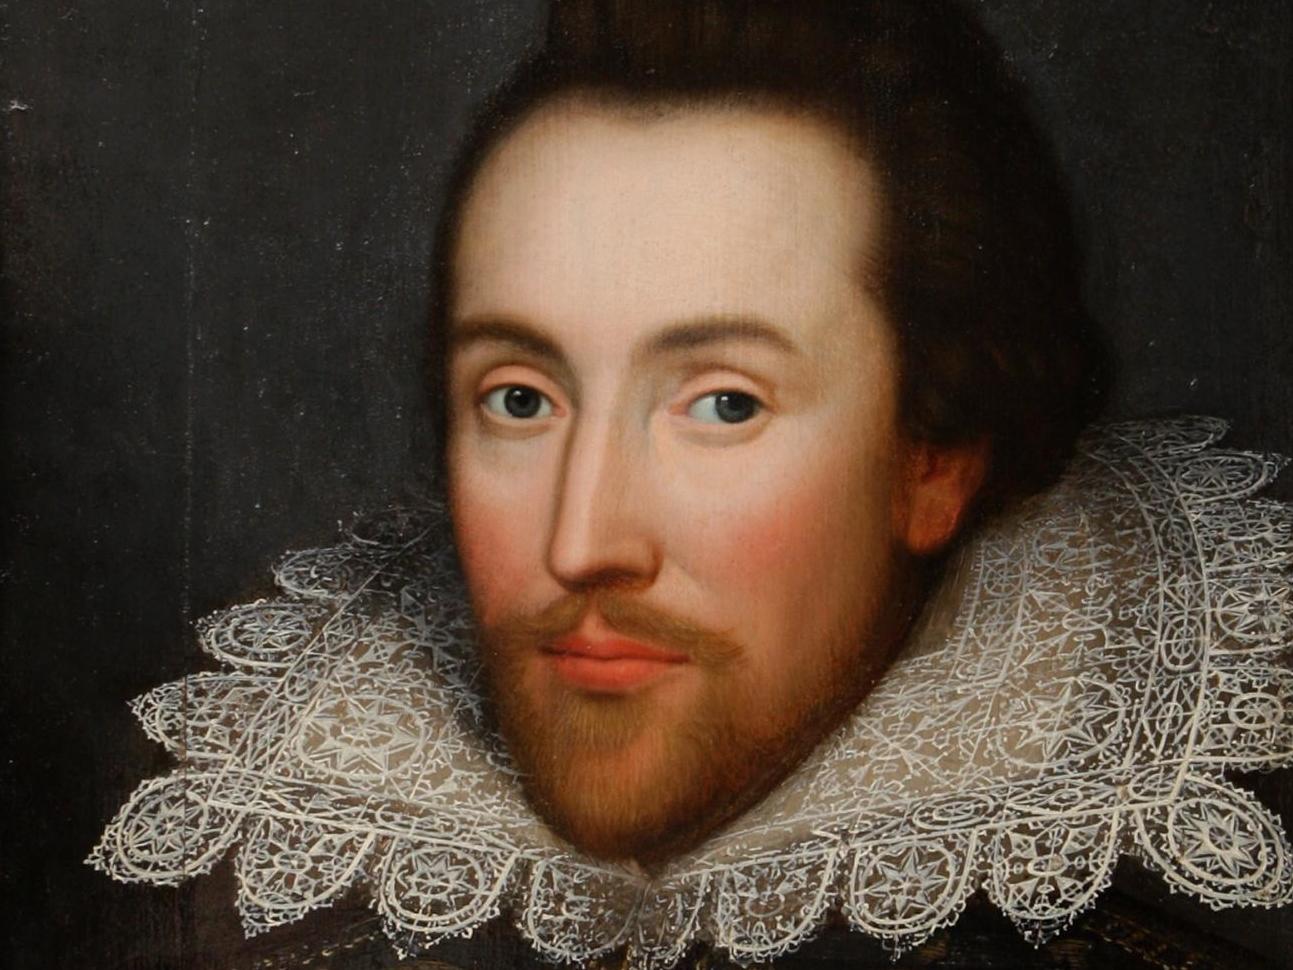 The bard understood people in all their dazzling diversity